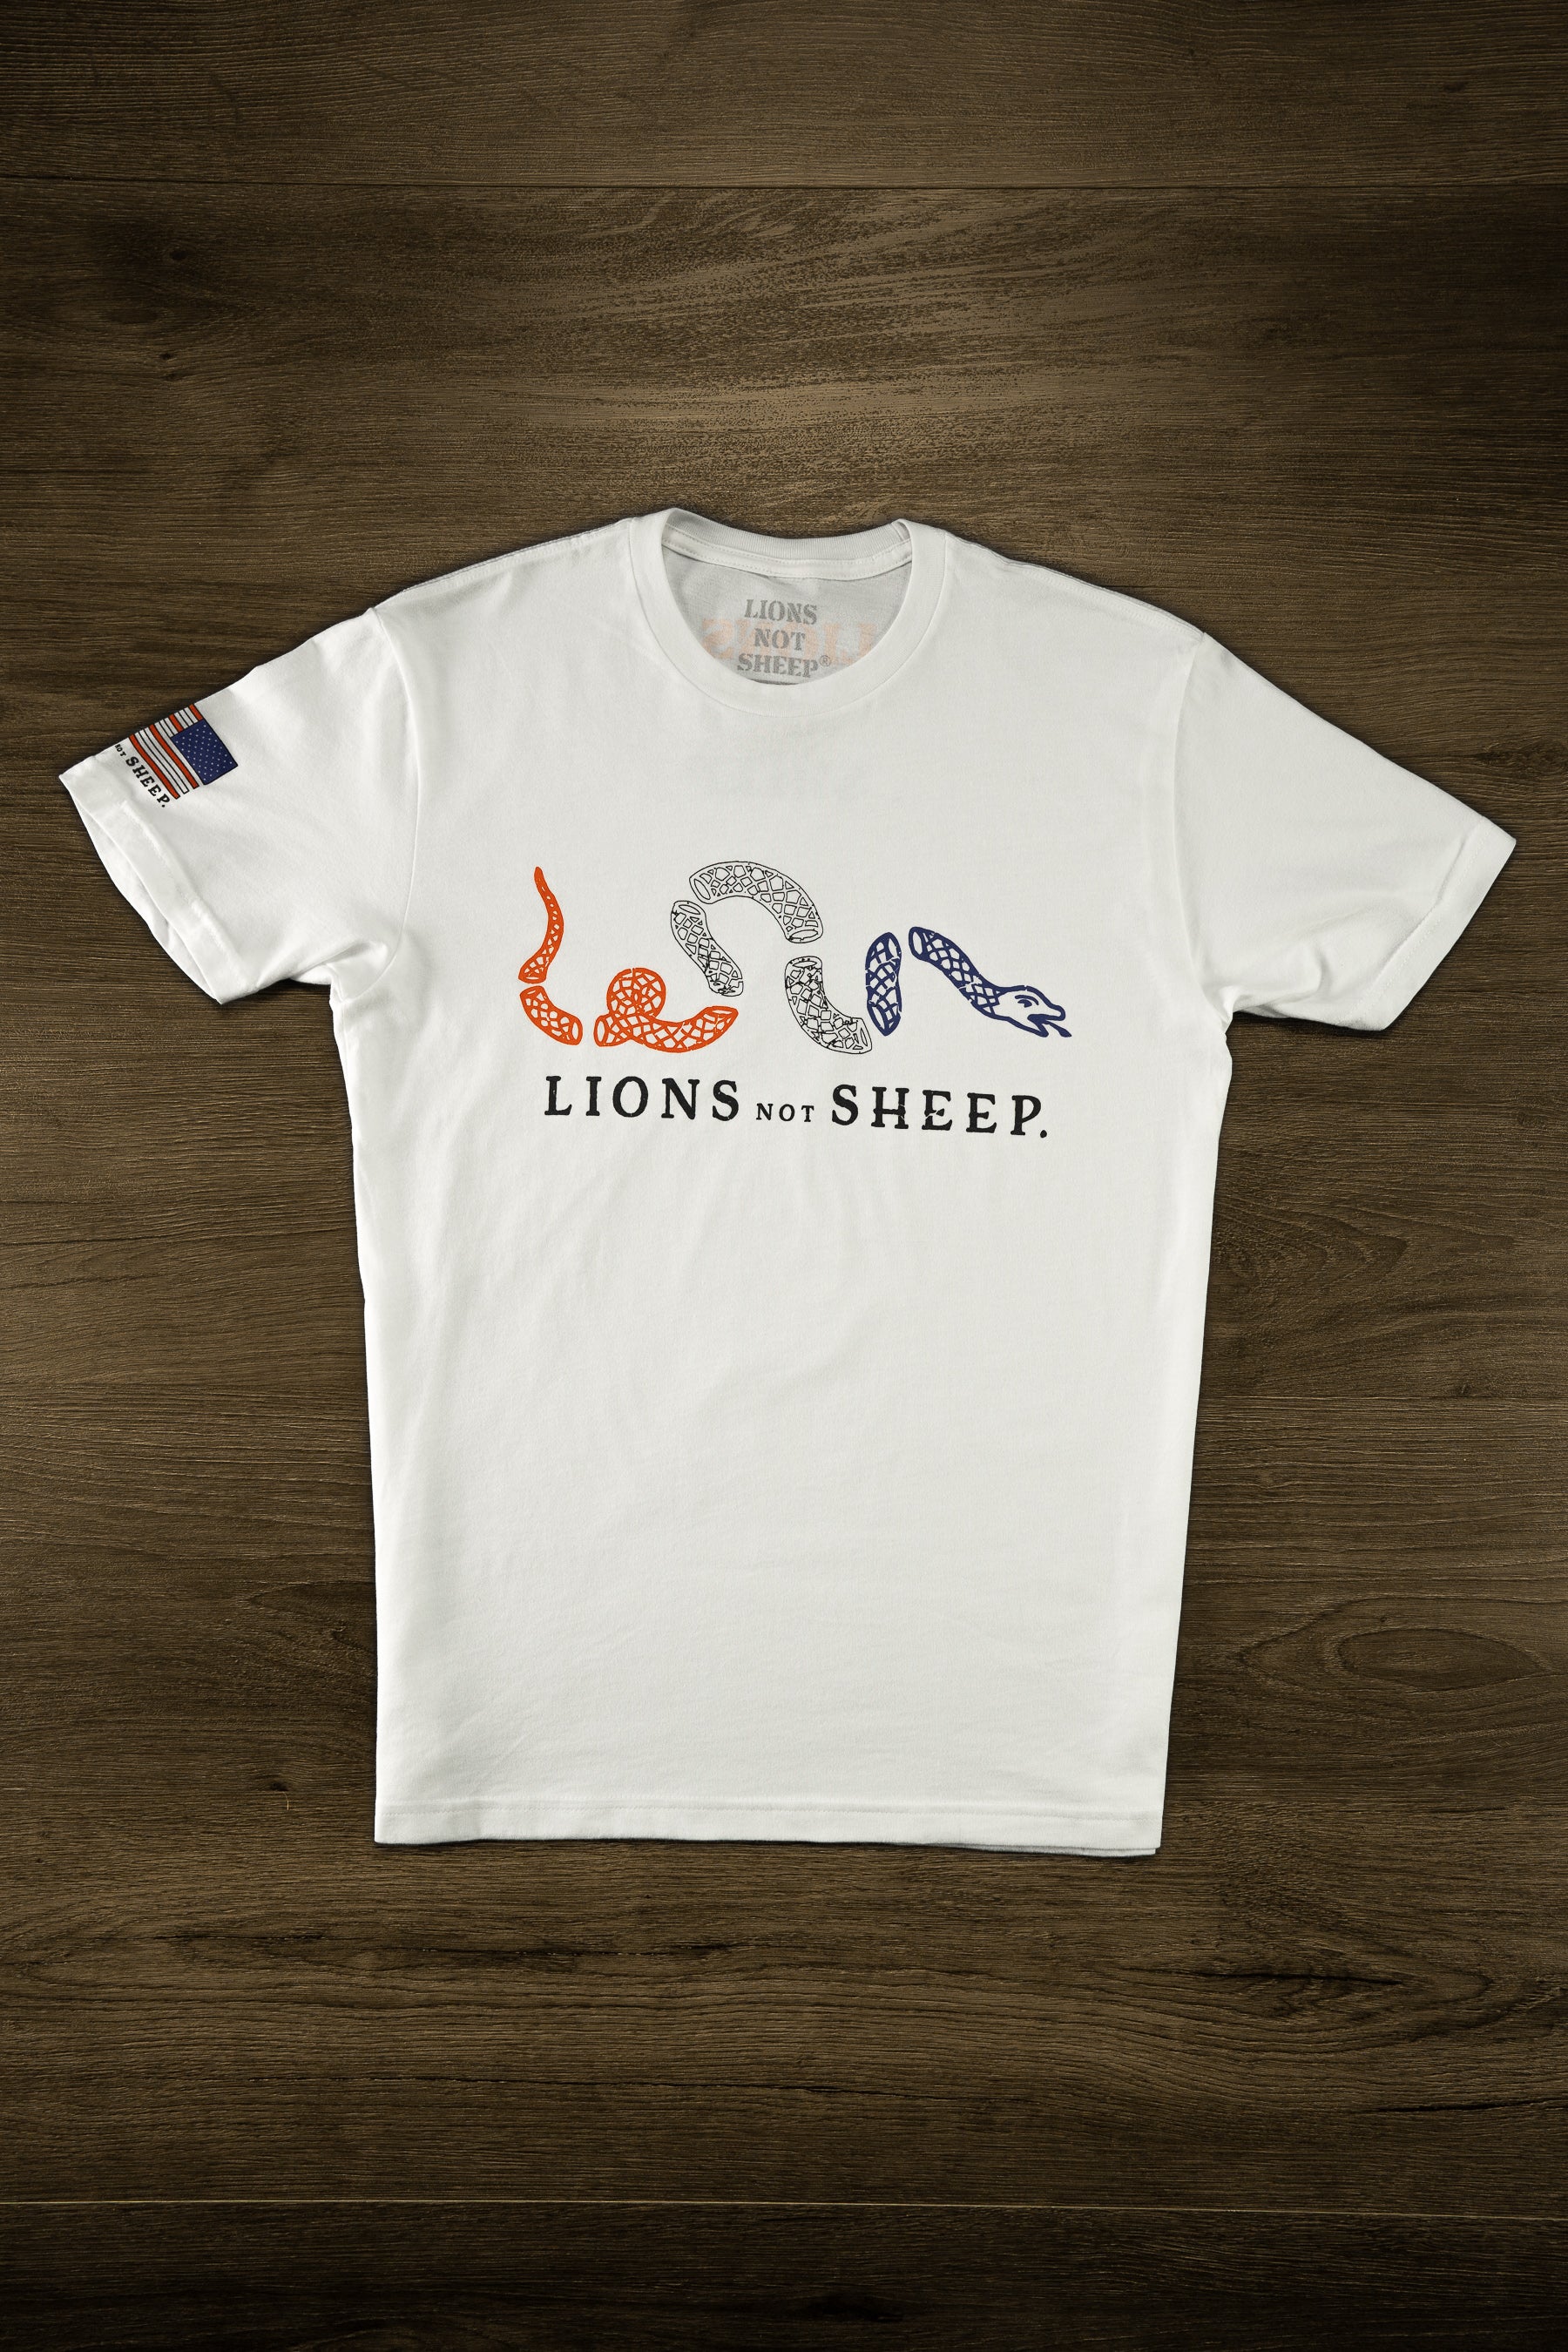 Lions Not Sheep "Join or Die" RWB Tee - Lions Not Sheep ®